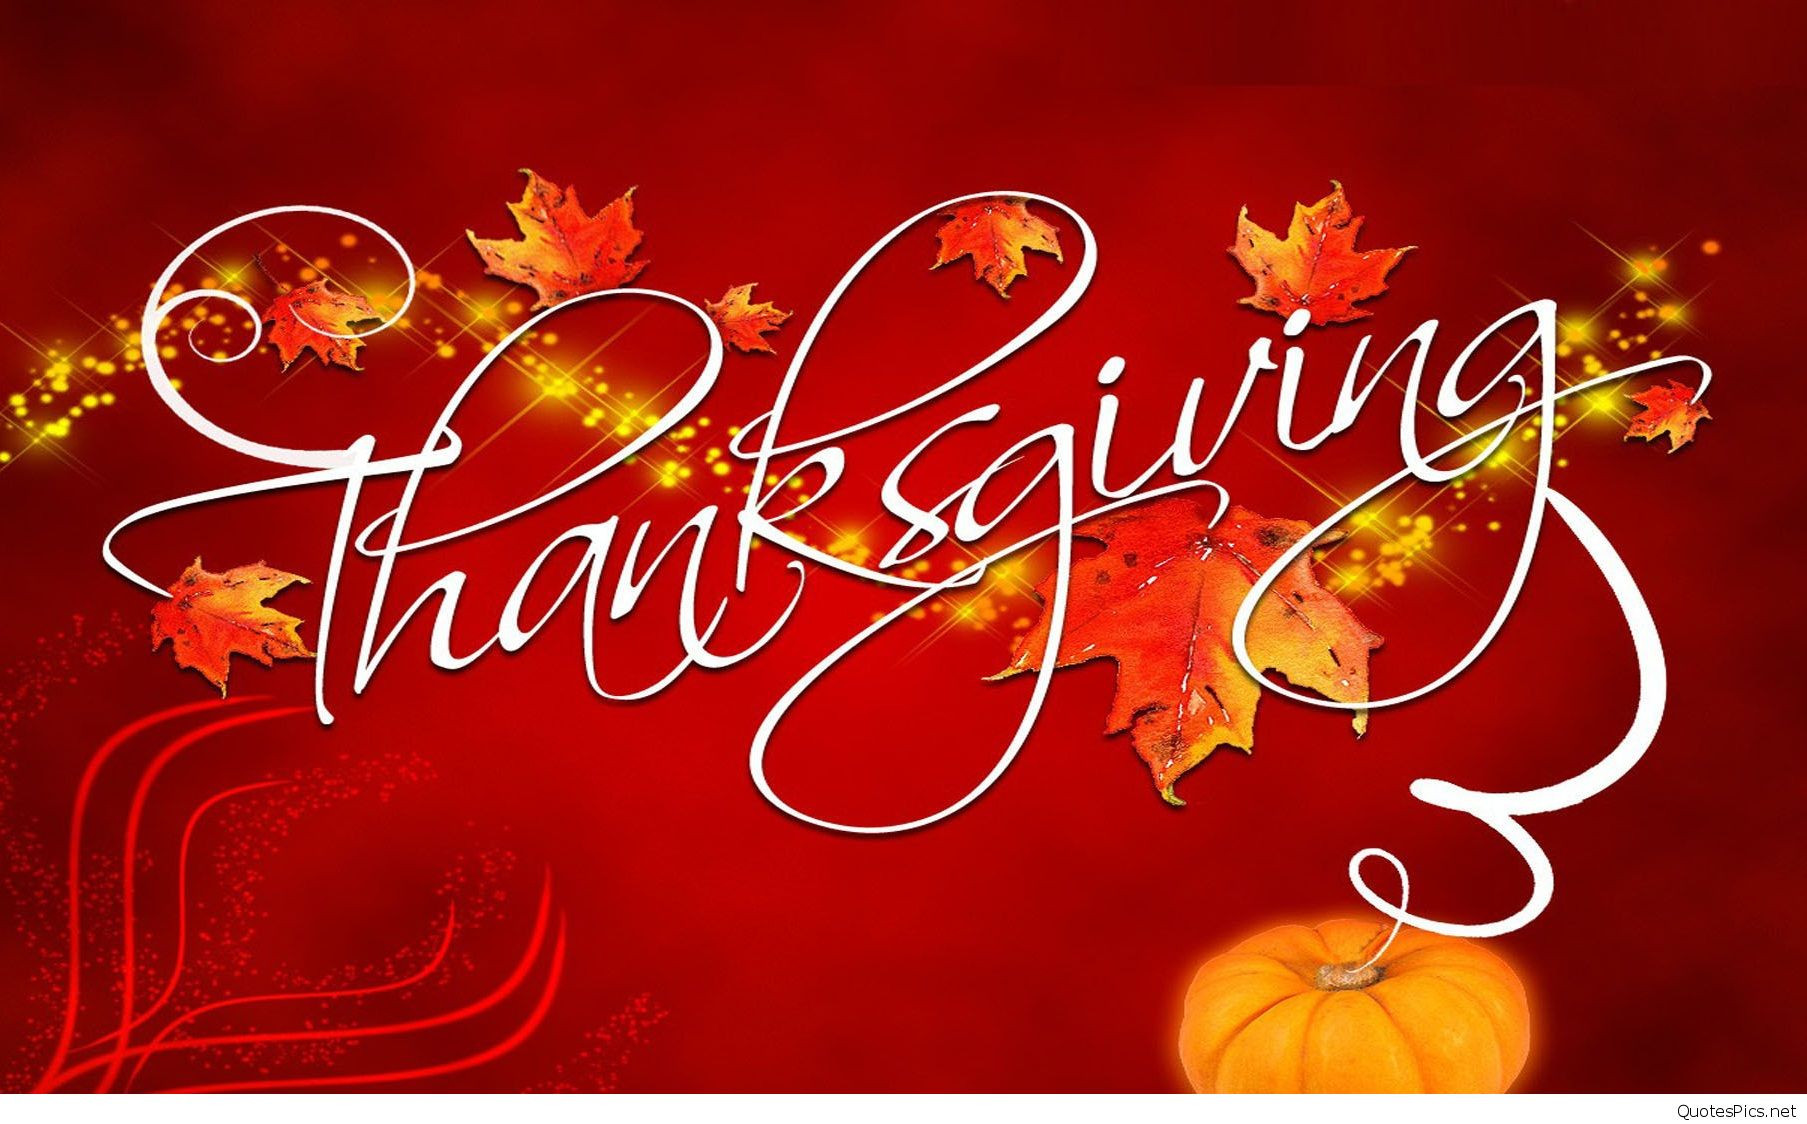 Thanksgiving Quotes Wallpaper
 Cute Happy Thanksgiving wallpapers quotes images 2016 2017